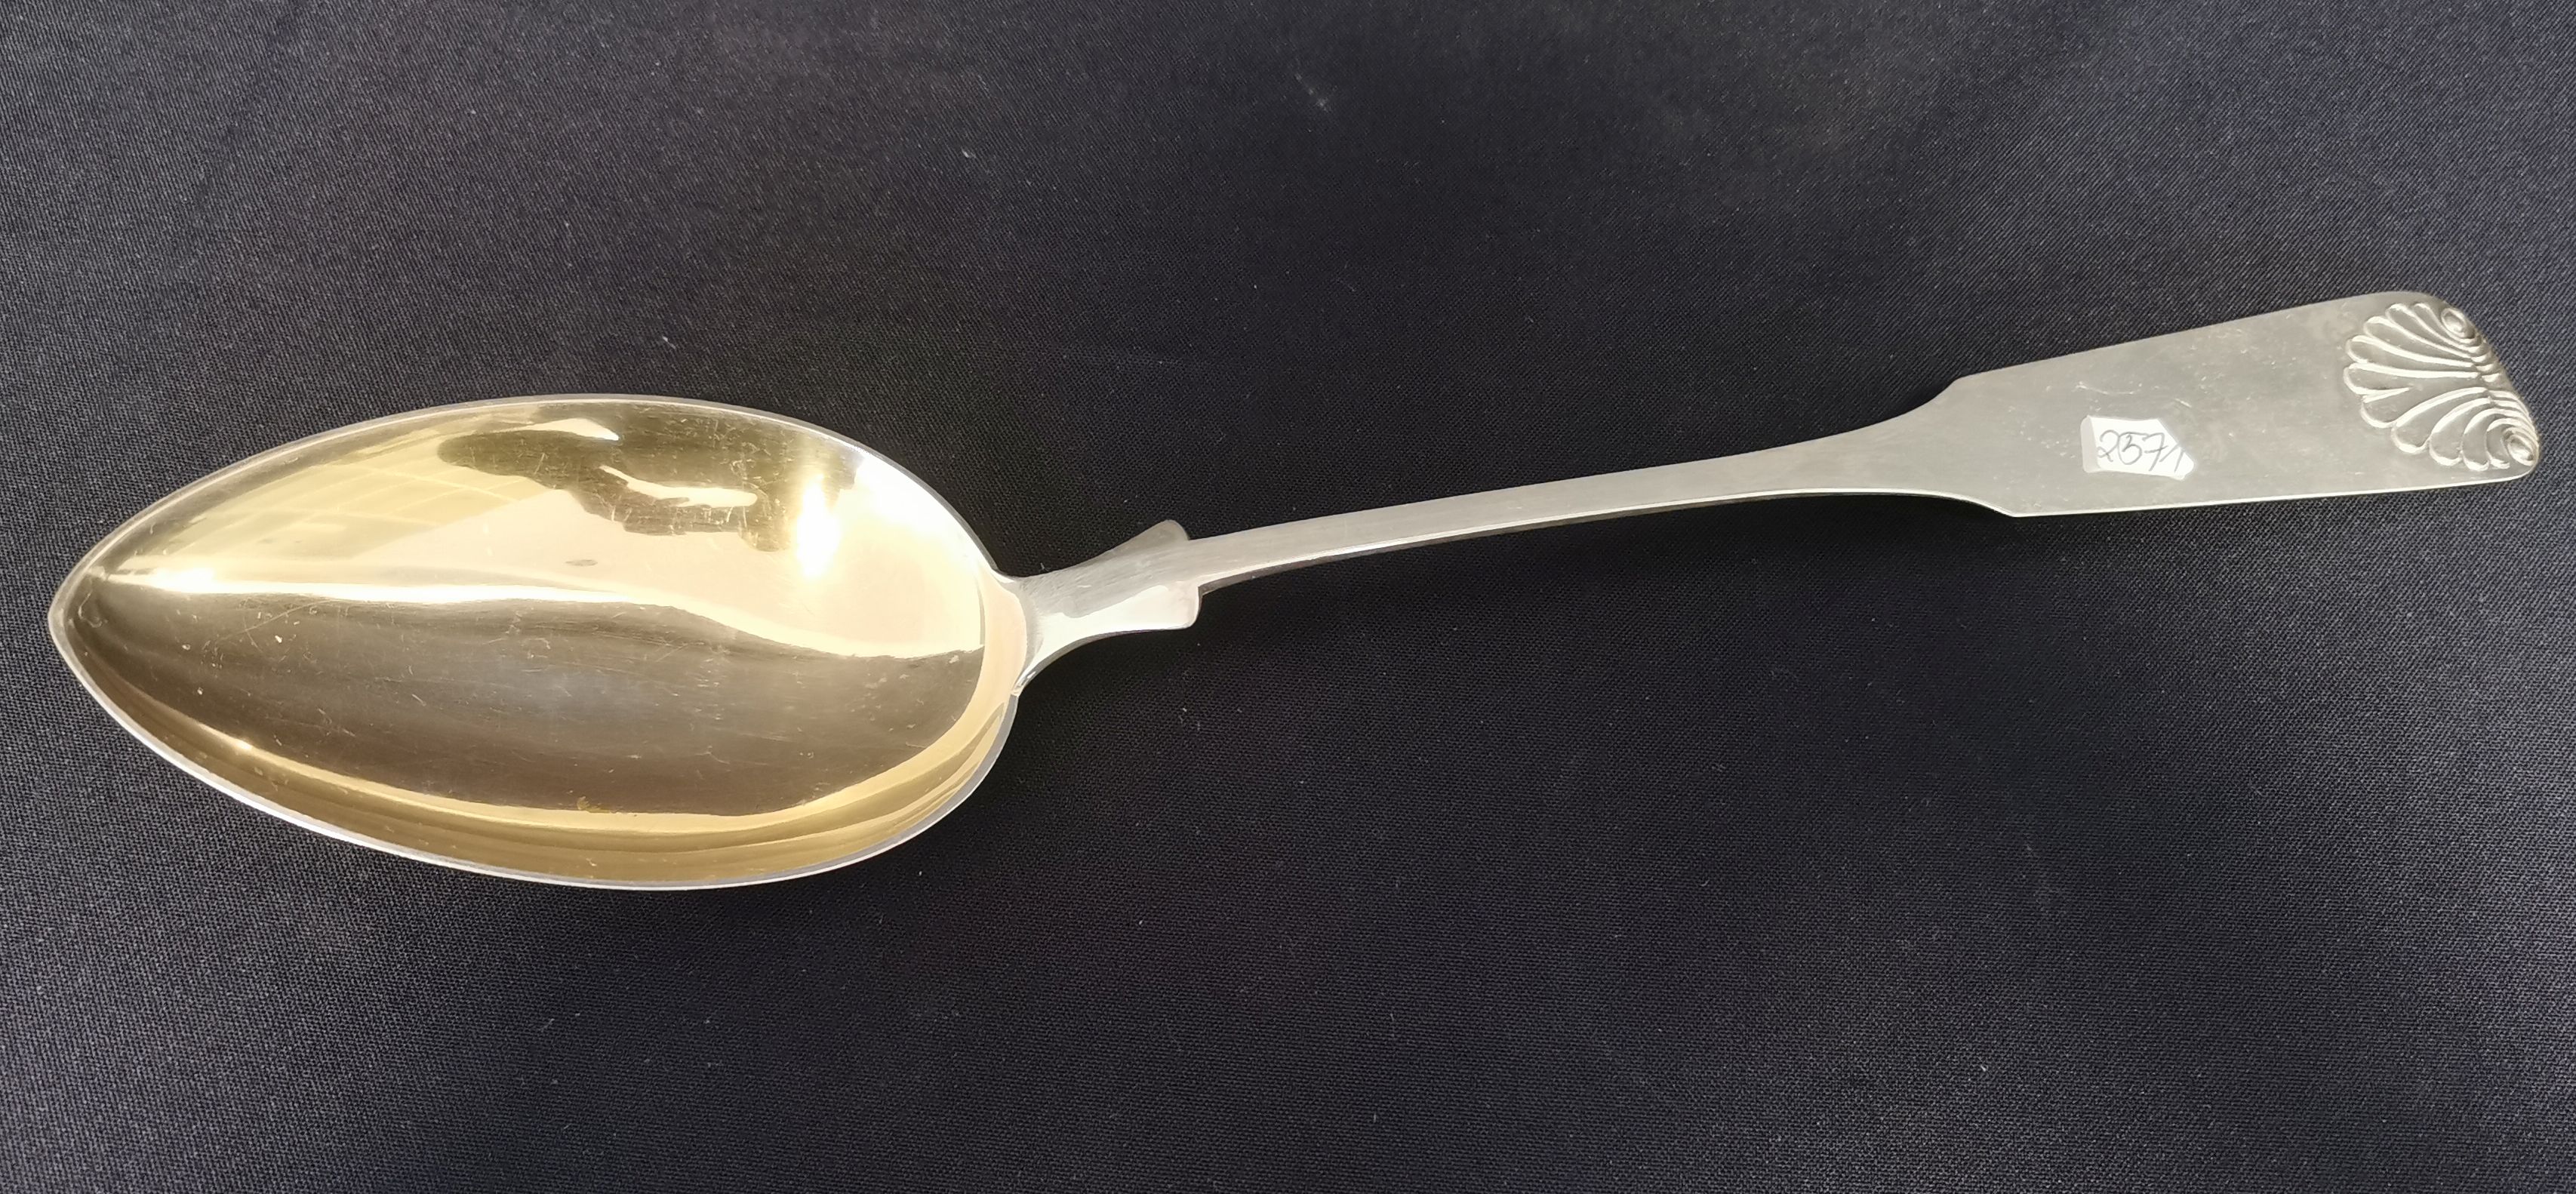 LARGE LADLE FROM 1918